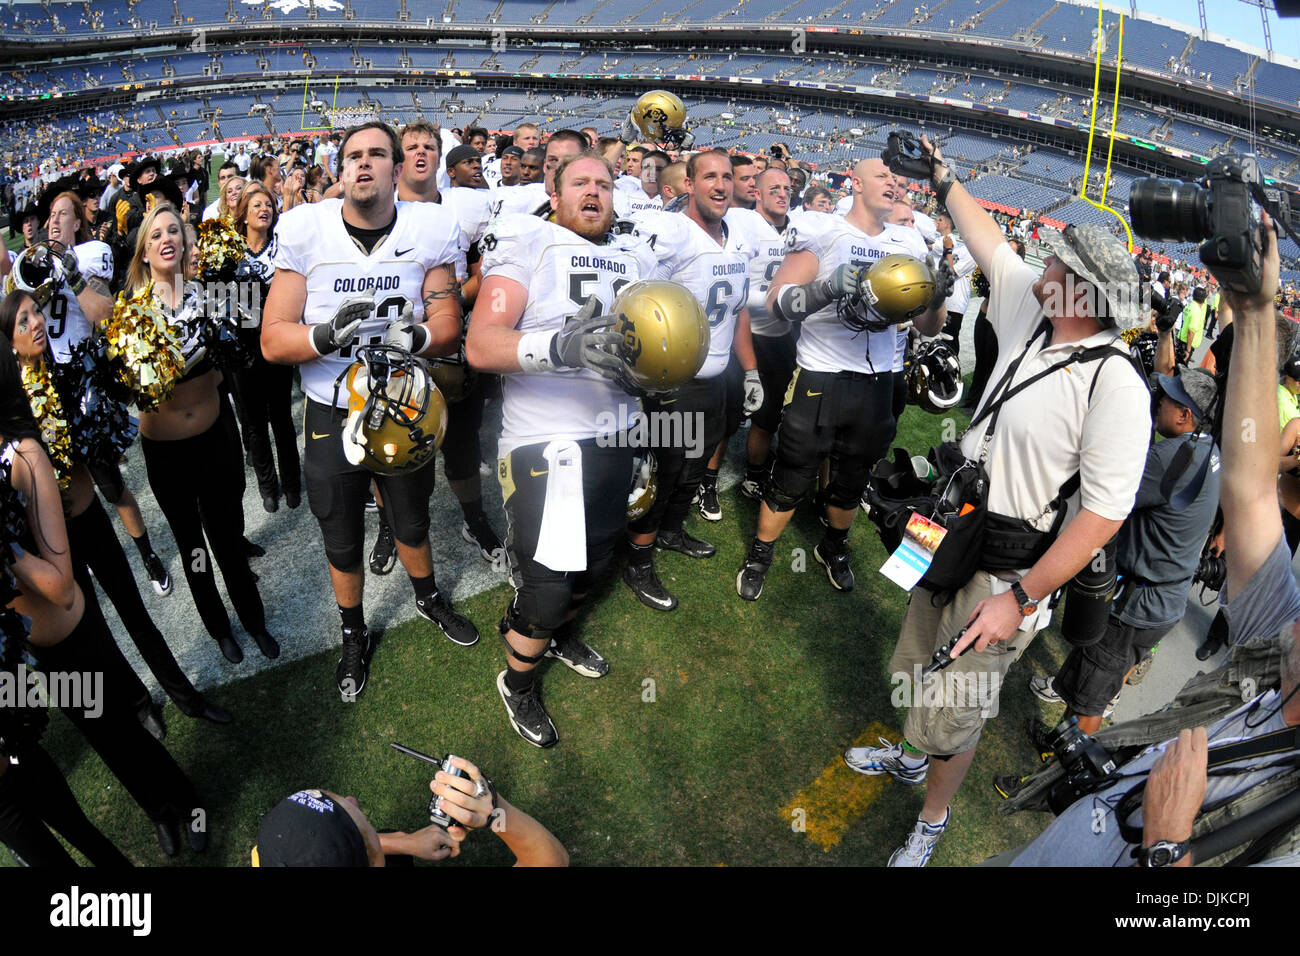 Sep. 04, 2010 - Denver, Colorado, United States of America - Colorado players, led by Colorado Buffaloes center Keenan Stevens (56) chant to celebrate their victory after the Rocky Mountain Showdown game between the Colorado State Rams and the Colorado Buffaloes at Invesco Field at Mile High. Colorado defeated Colorado State by a score of 24-3. (Credit Image: © Andrew Fielding/Sout Stock Photo